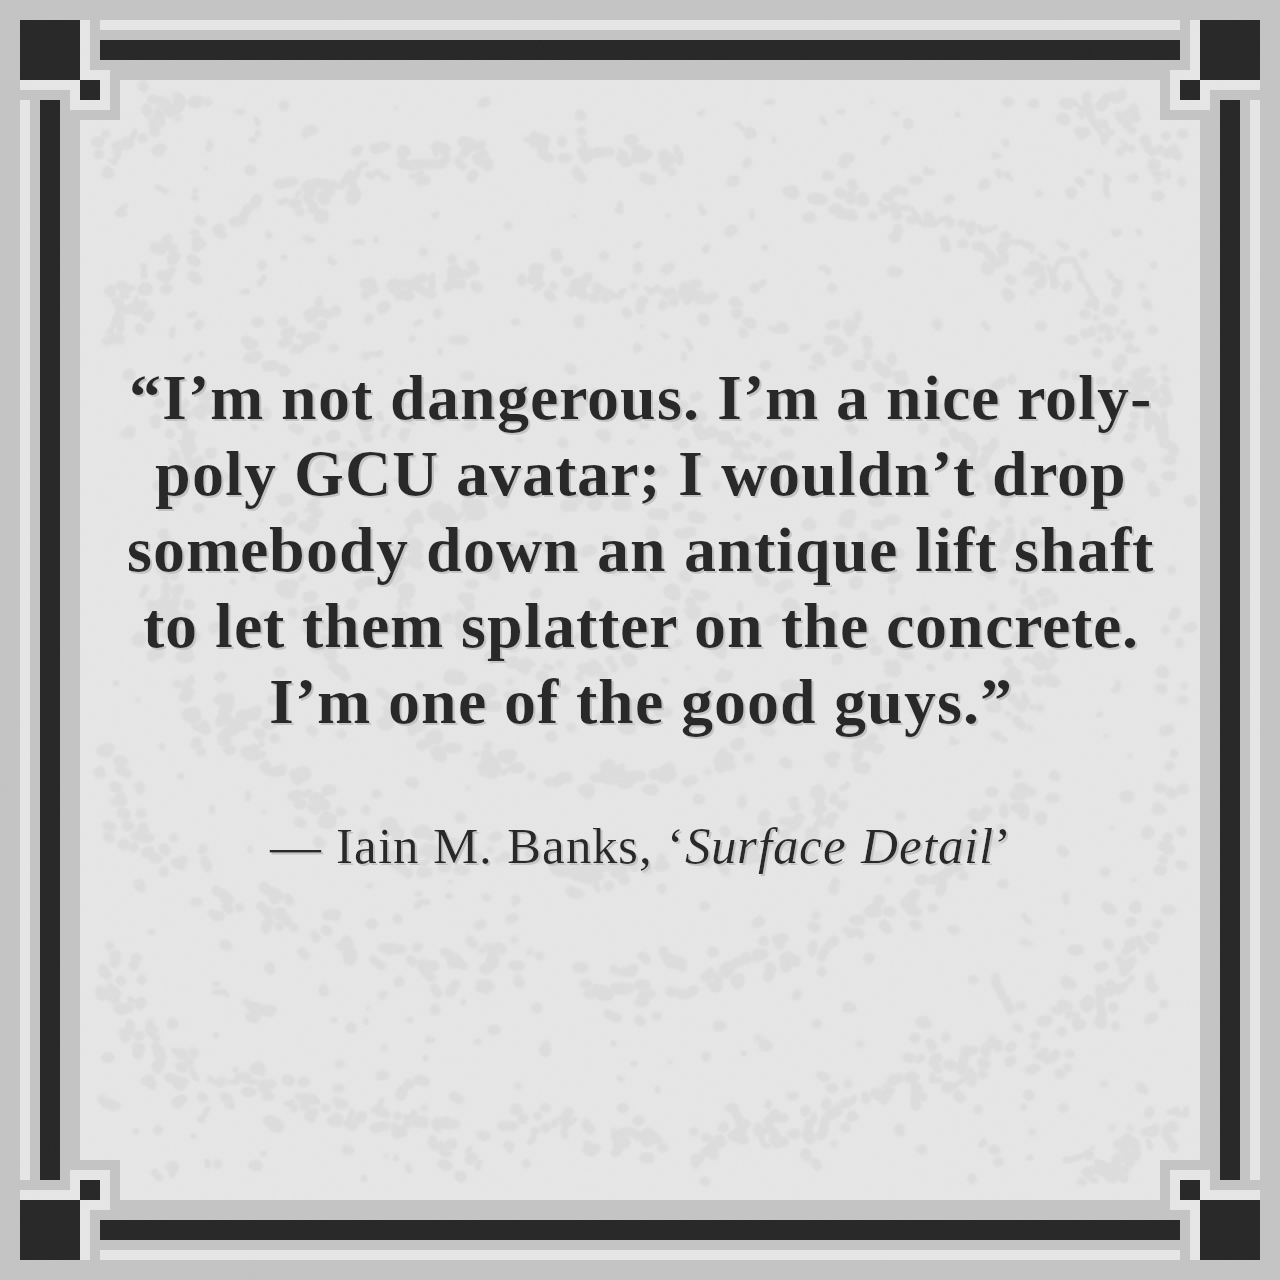 “I’m not dangerous. I’m a nice roly-poly GCU avatar; I wouldn’t drop somebody down an antique lift shaft to let them splatter on the concrete. I’m one of the good guys.”

— Iain M. Banks, ‘Surface Detail’